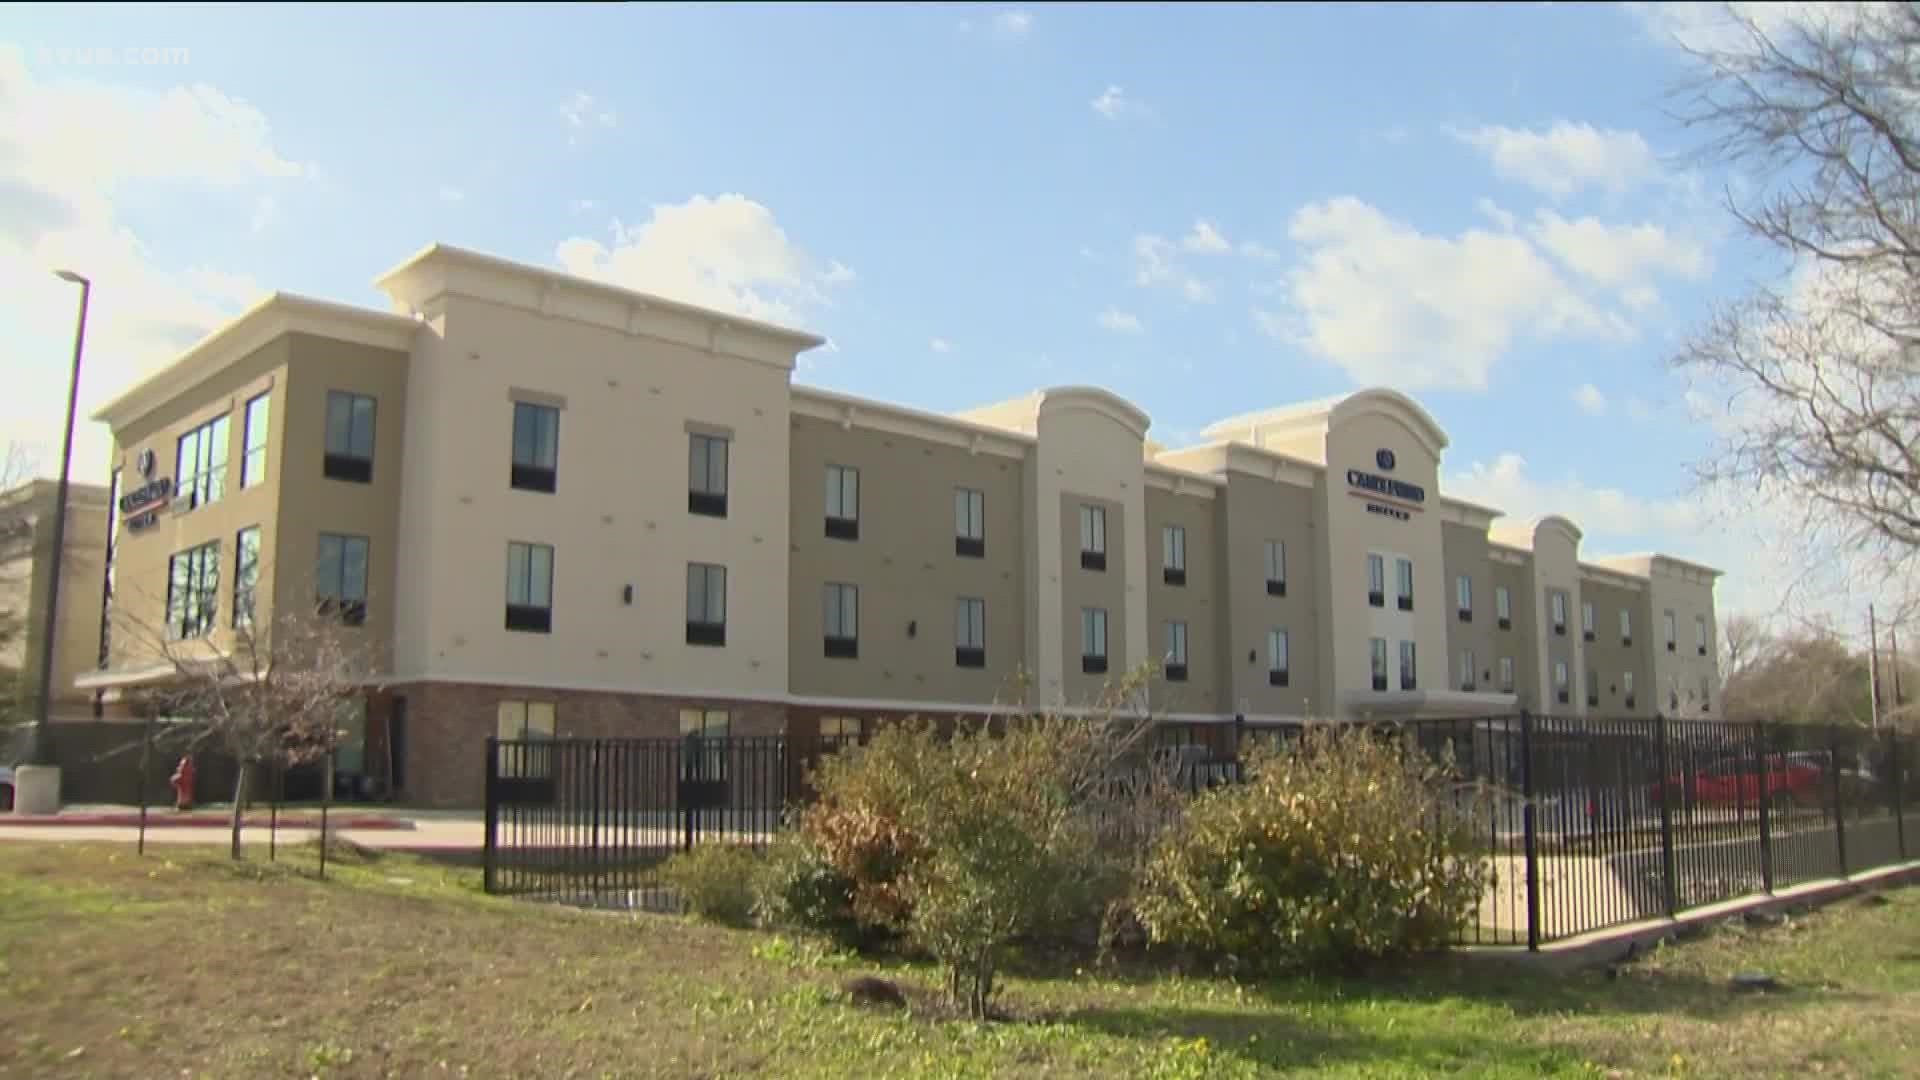 New safety concerns were raised after people broke into and damaged a hotel in North Austin that the City purchased to serve people experiencing homelessness.